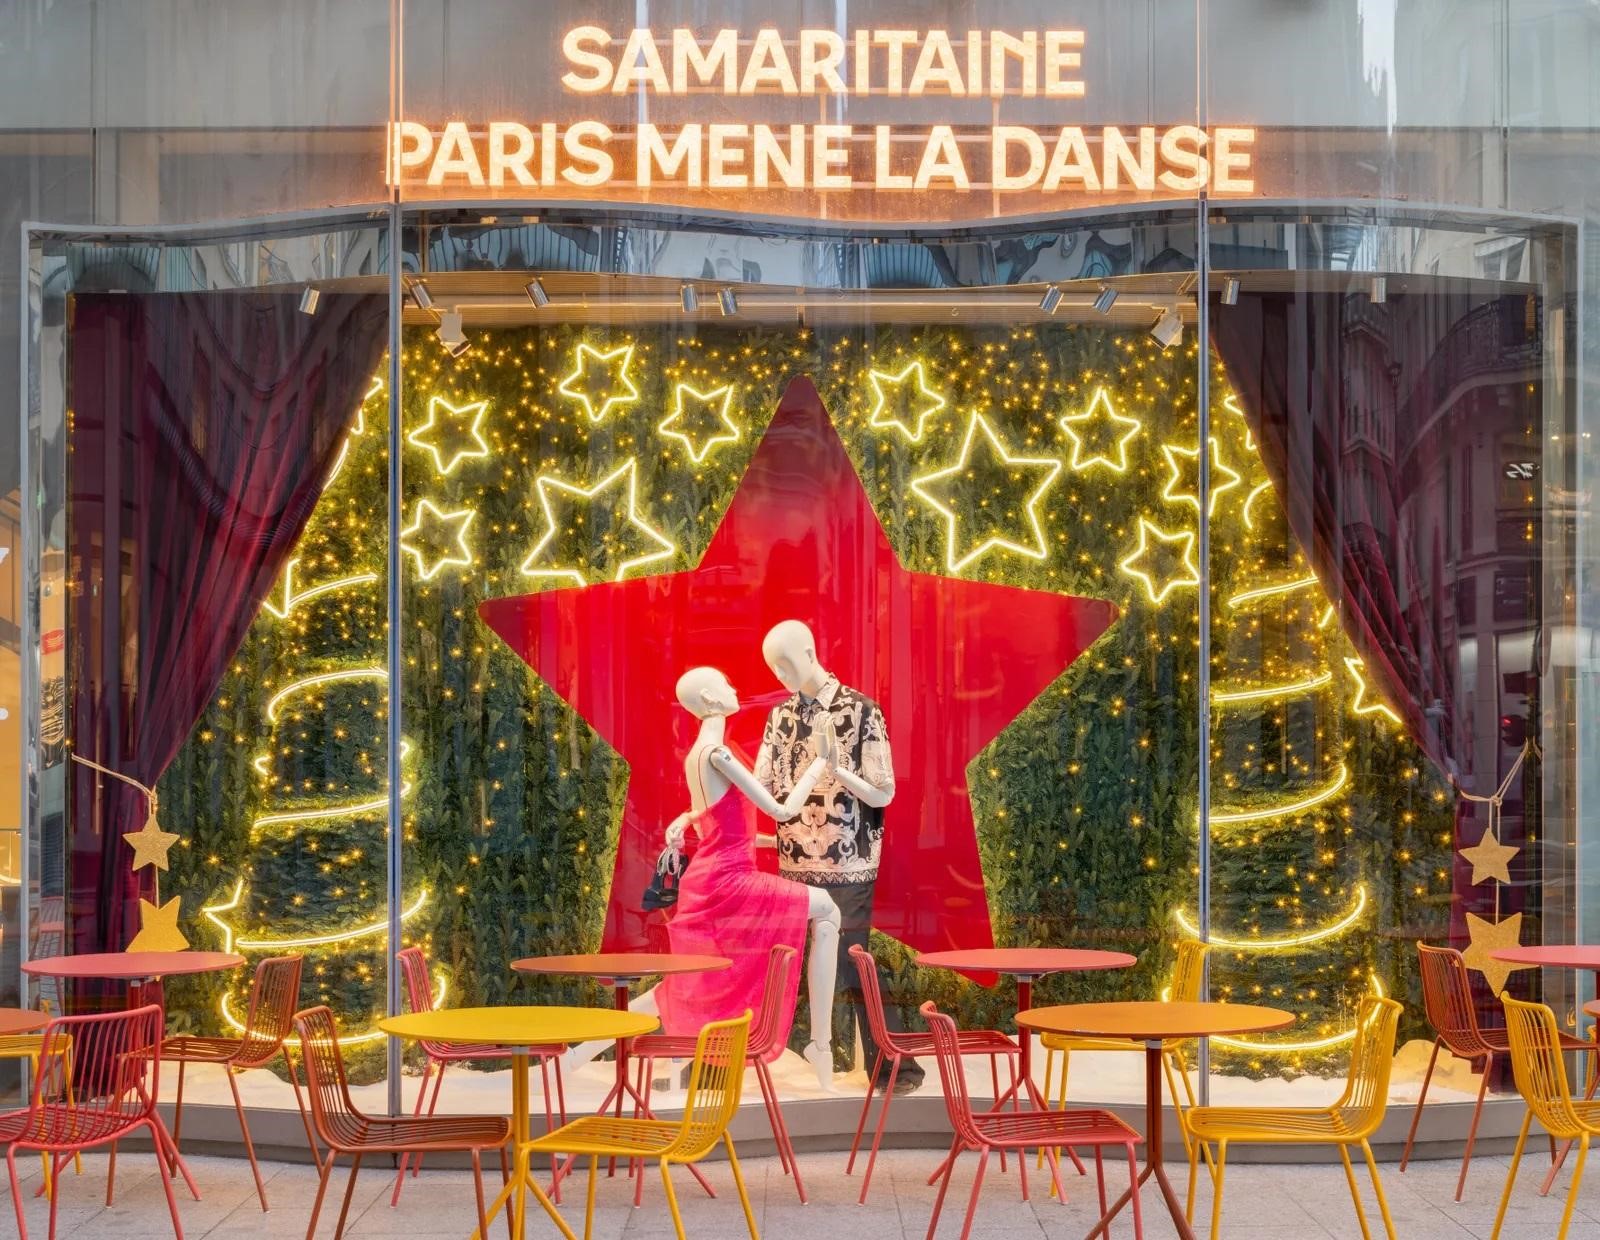 Christmas-themed storefront with a couple mannequin in a dancing stance surrounded by Christmas trees and star lights